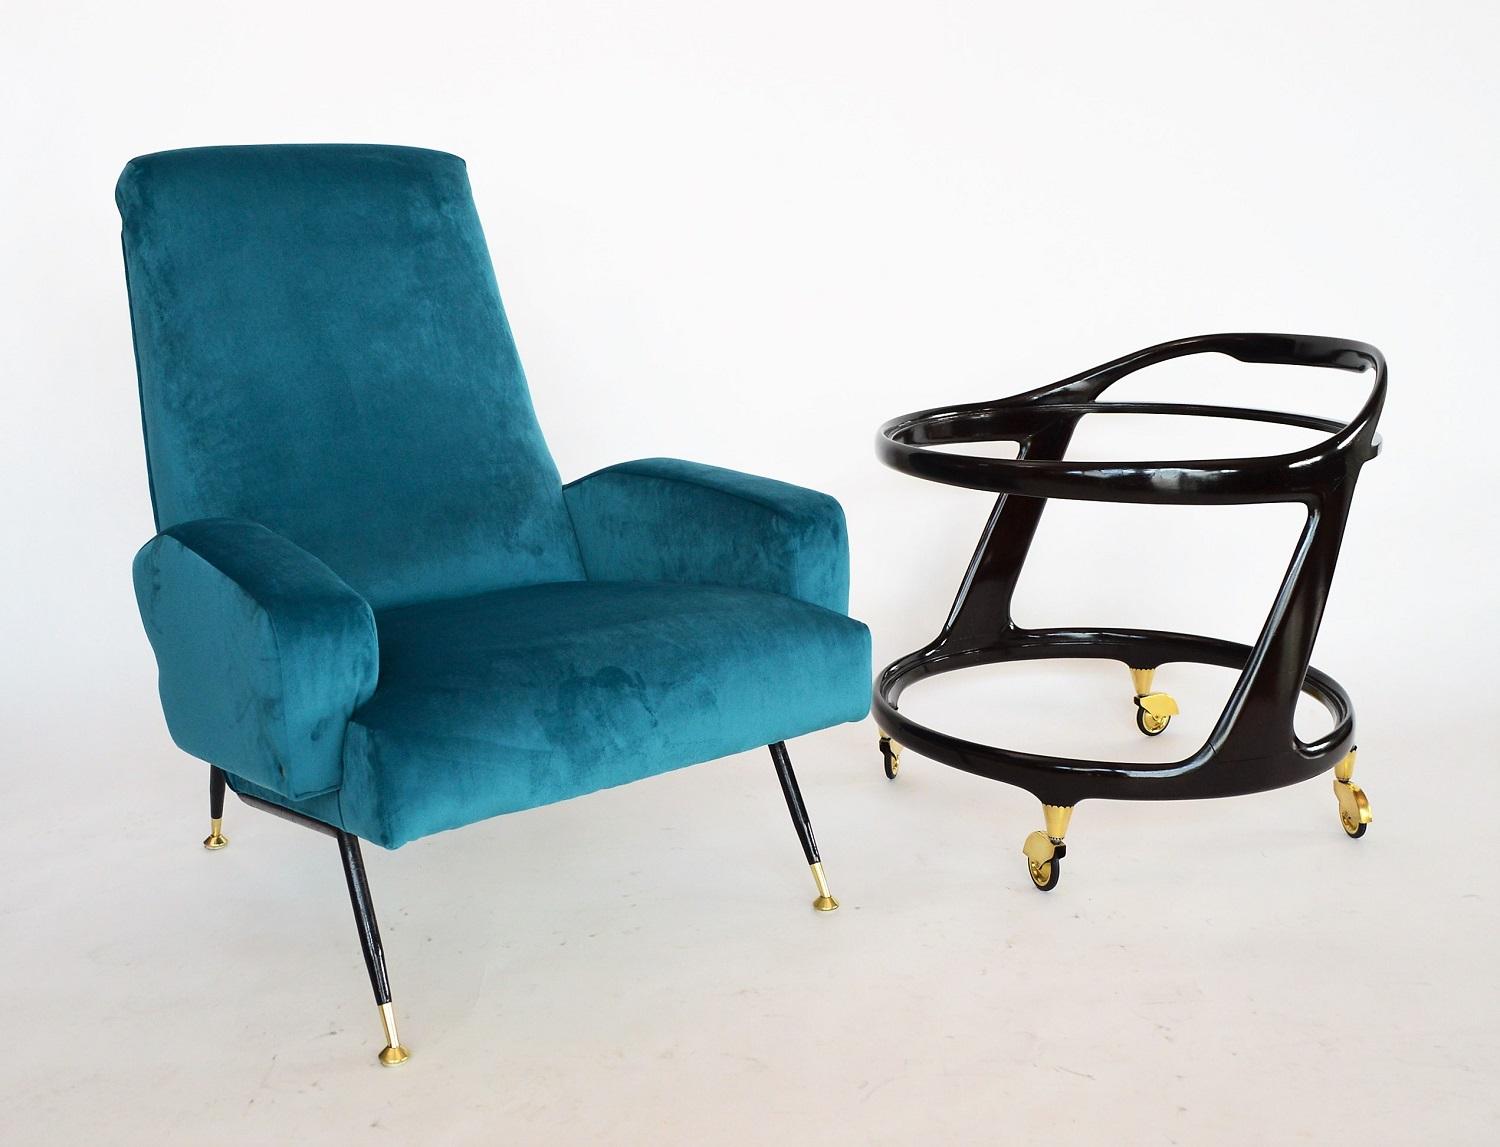 Polished Italian Midcentury Armchair in Petrol Velvet and Brass, 1950s